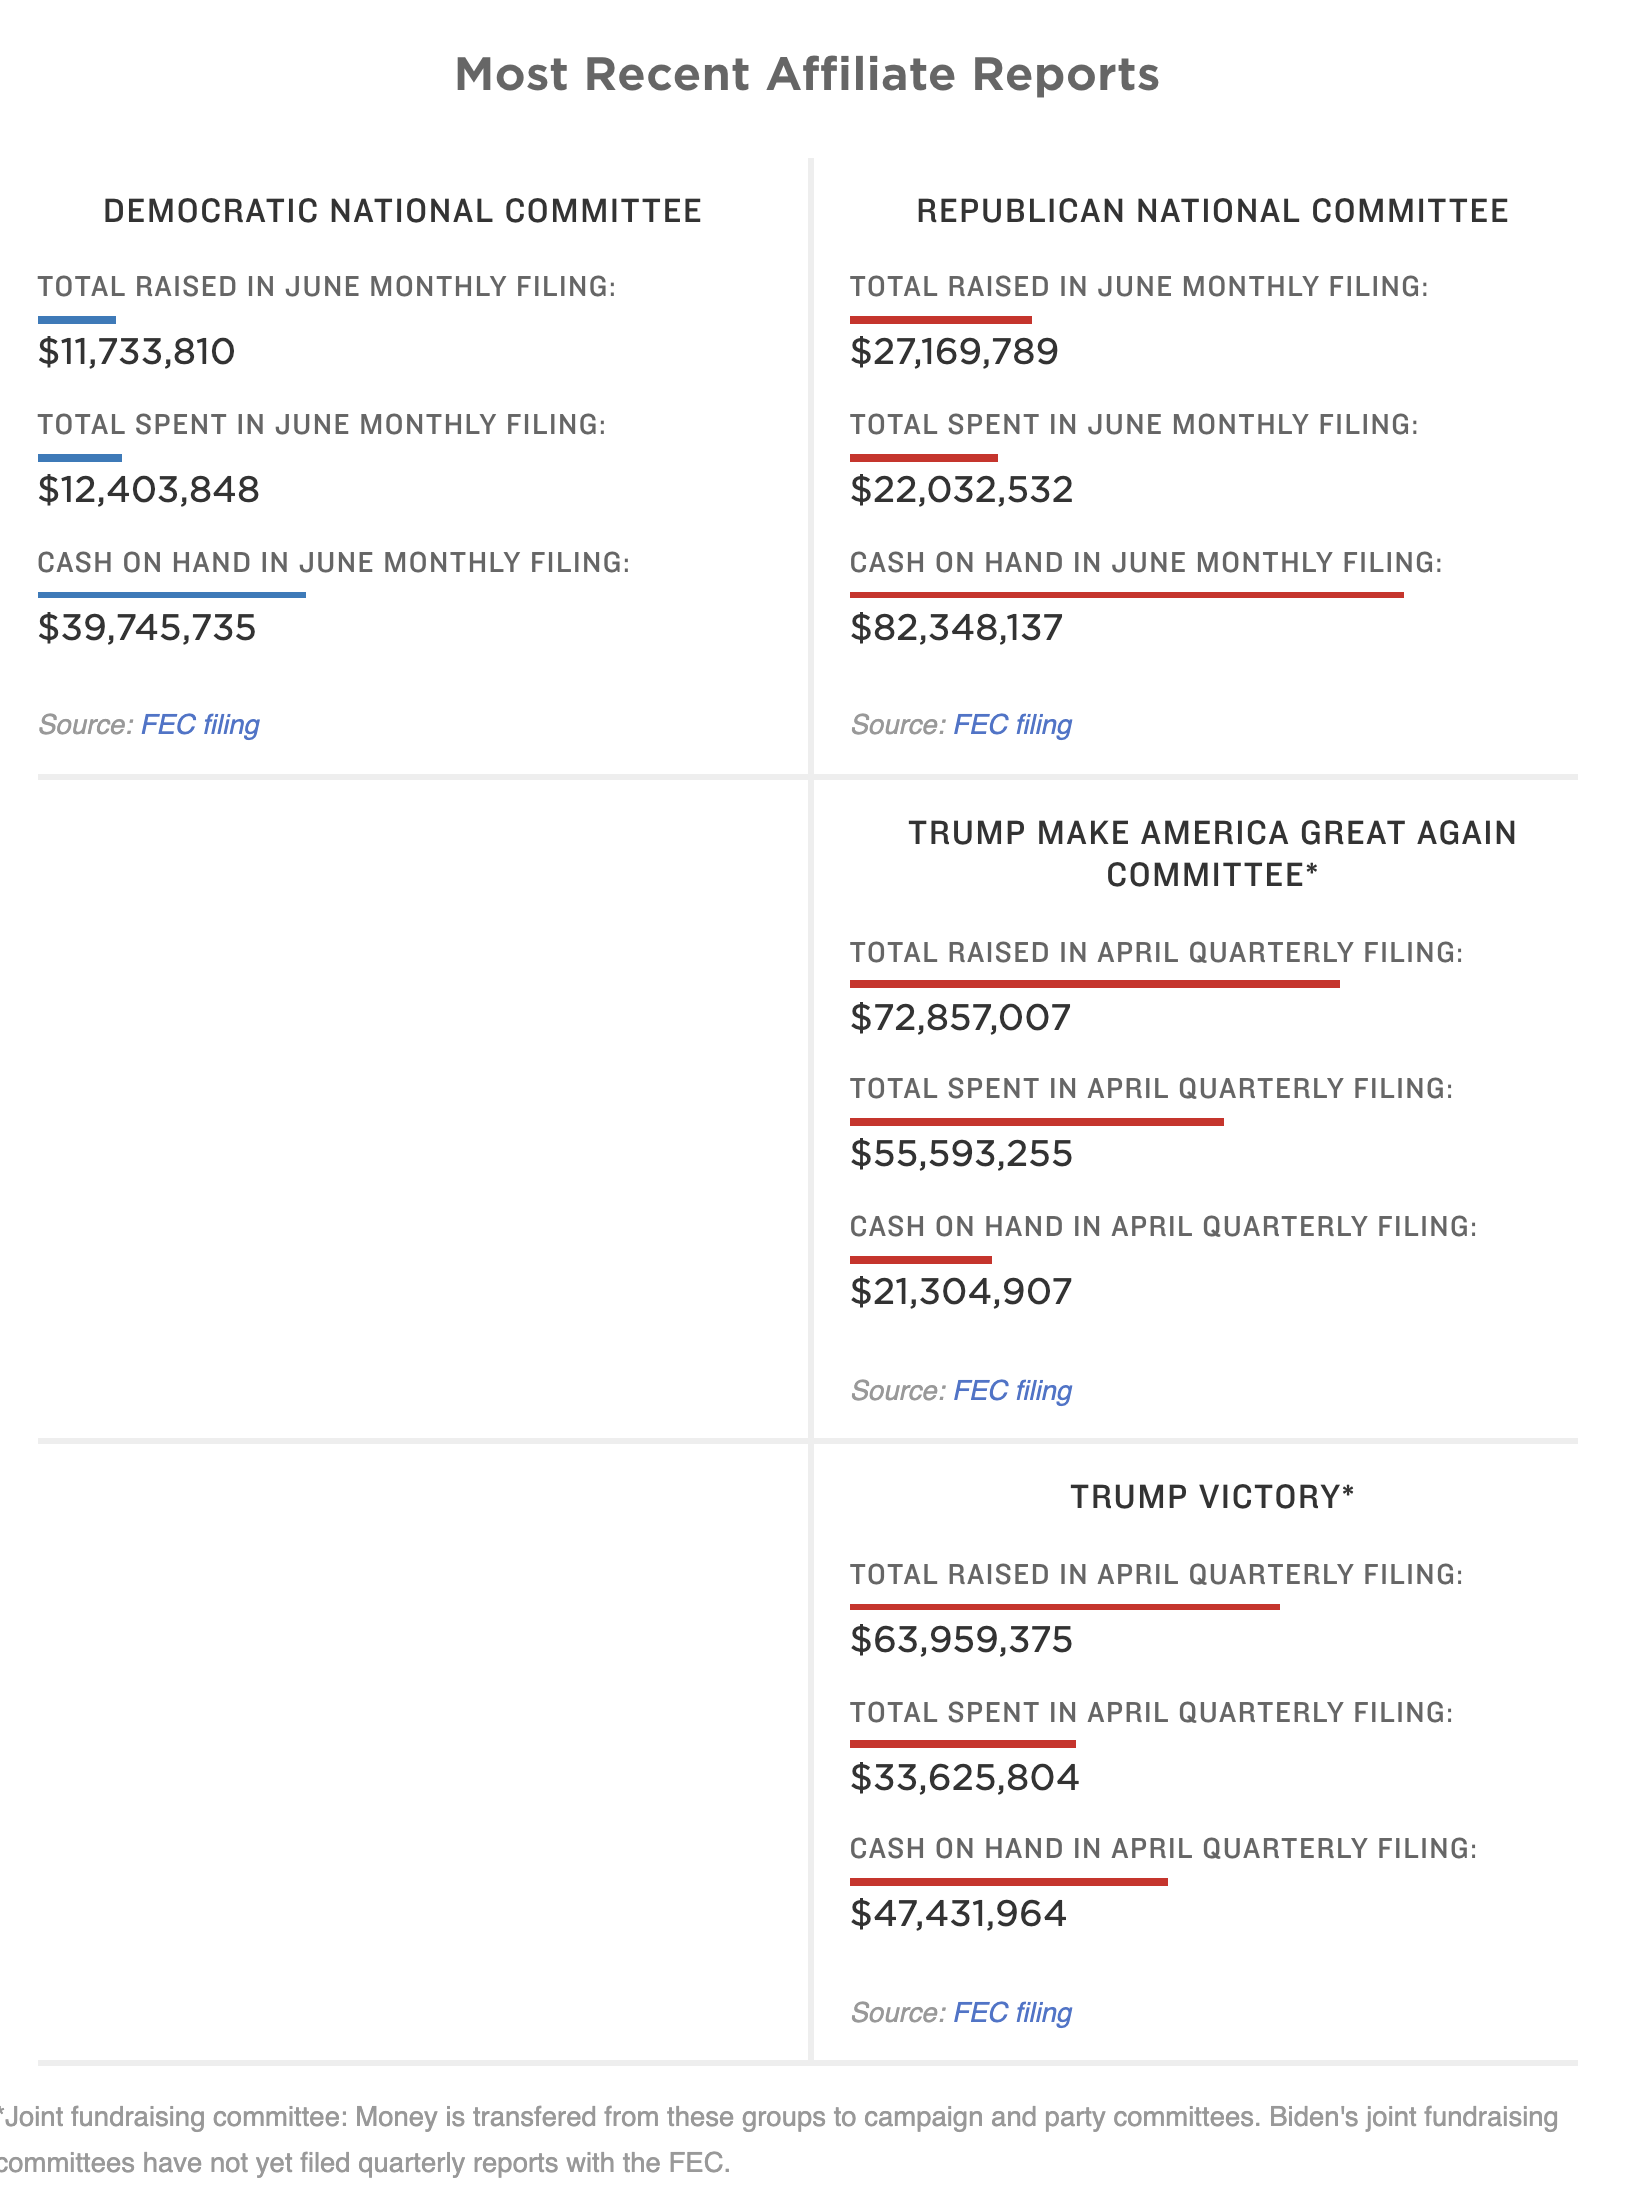 Screen-Shot-2020-06-22-at-8.21.51-AM New 2020 Fundraising Totals Confirm Accelerating Blue Wave Corruption Election 2020 Featured Politics Top Stories 